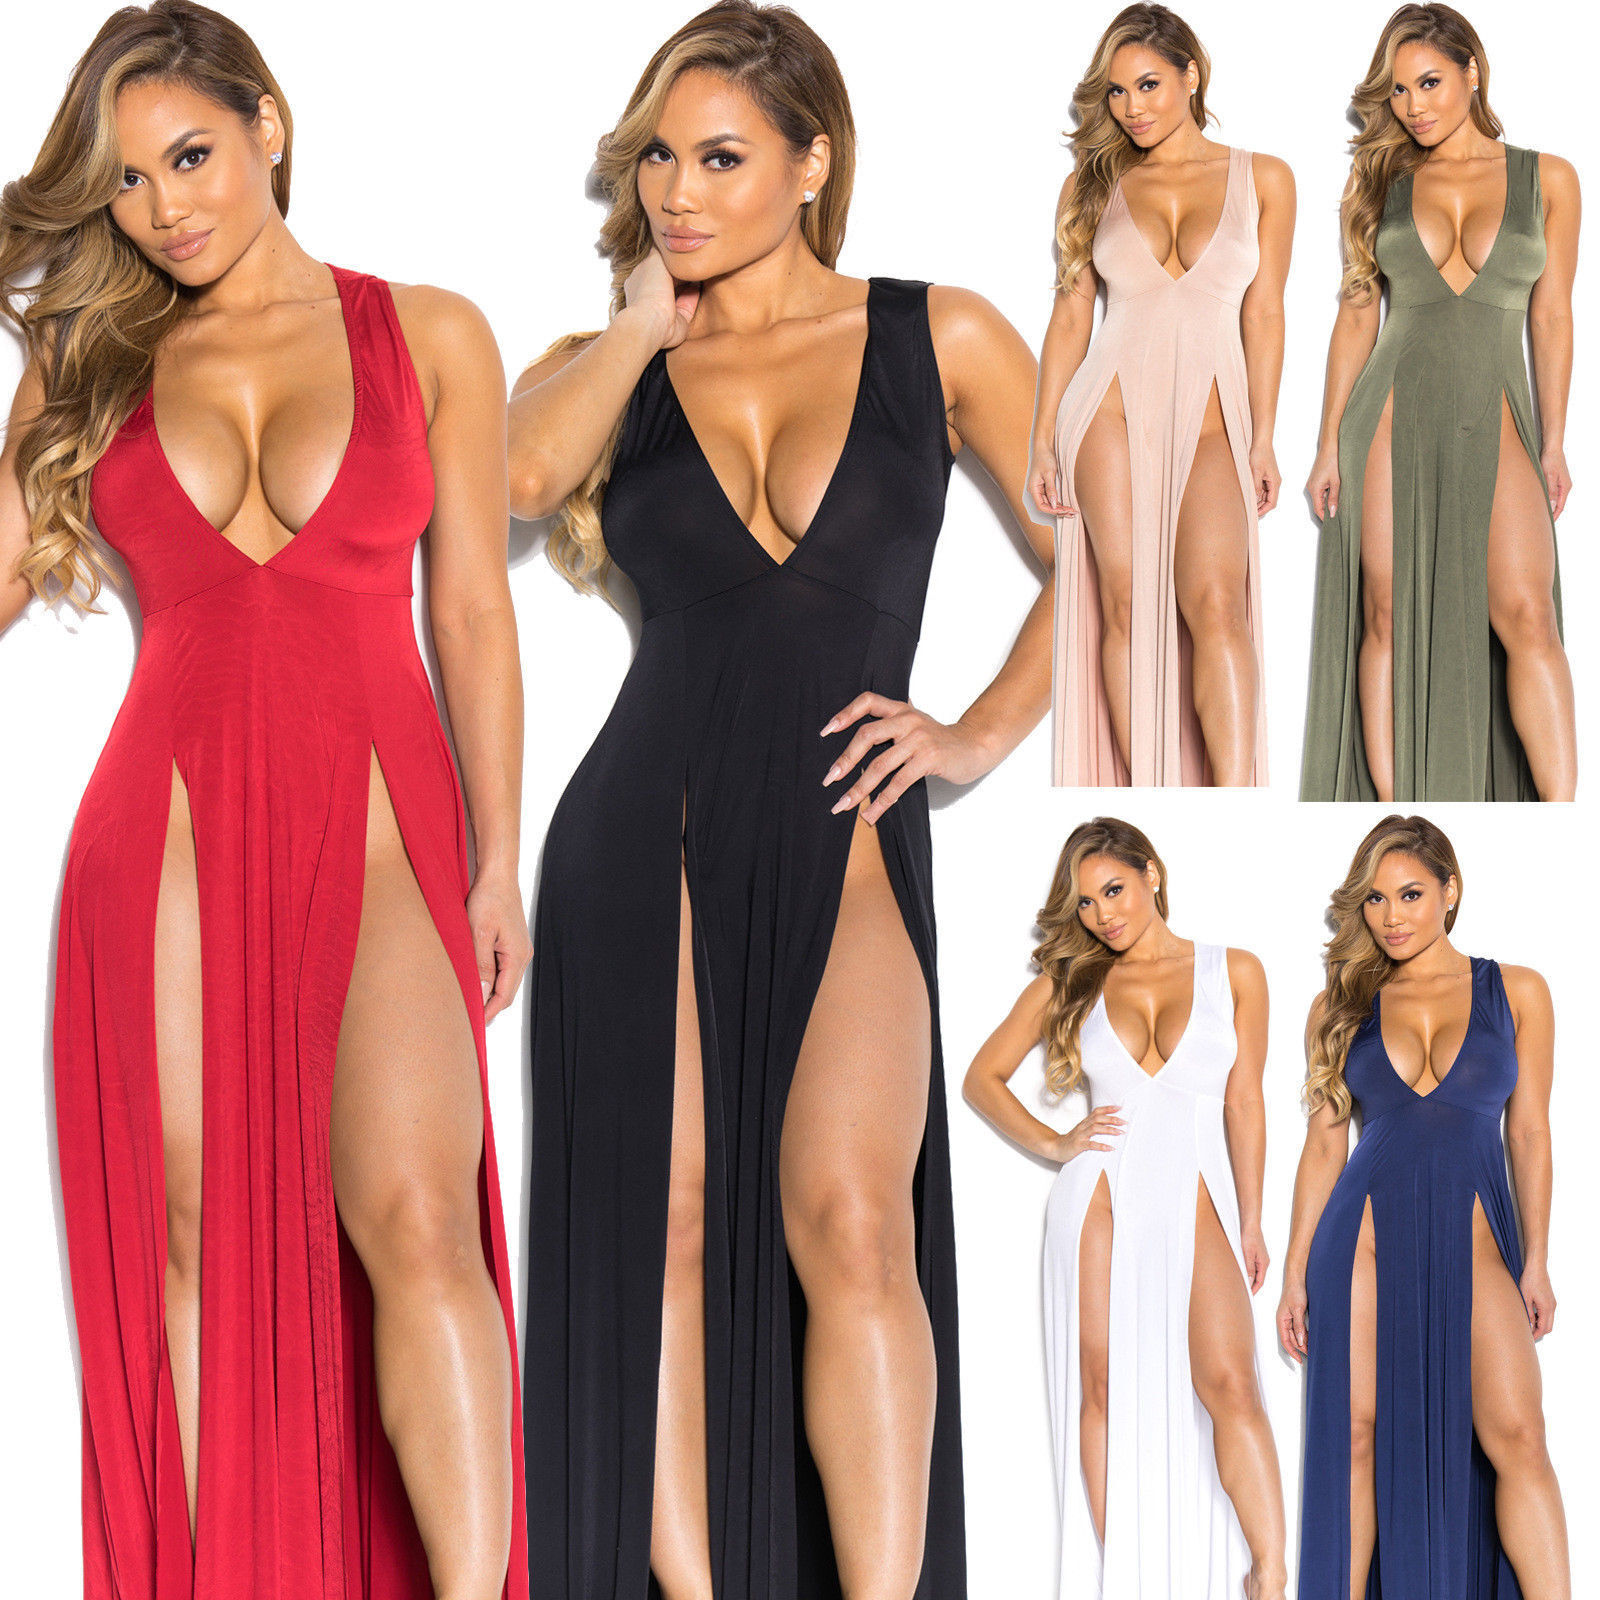 Sexy Women V Neck Low Cut Clubwear High Side Slit Cocktail Party Club Dress Unbranded Does Not Apply